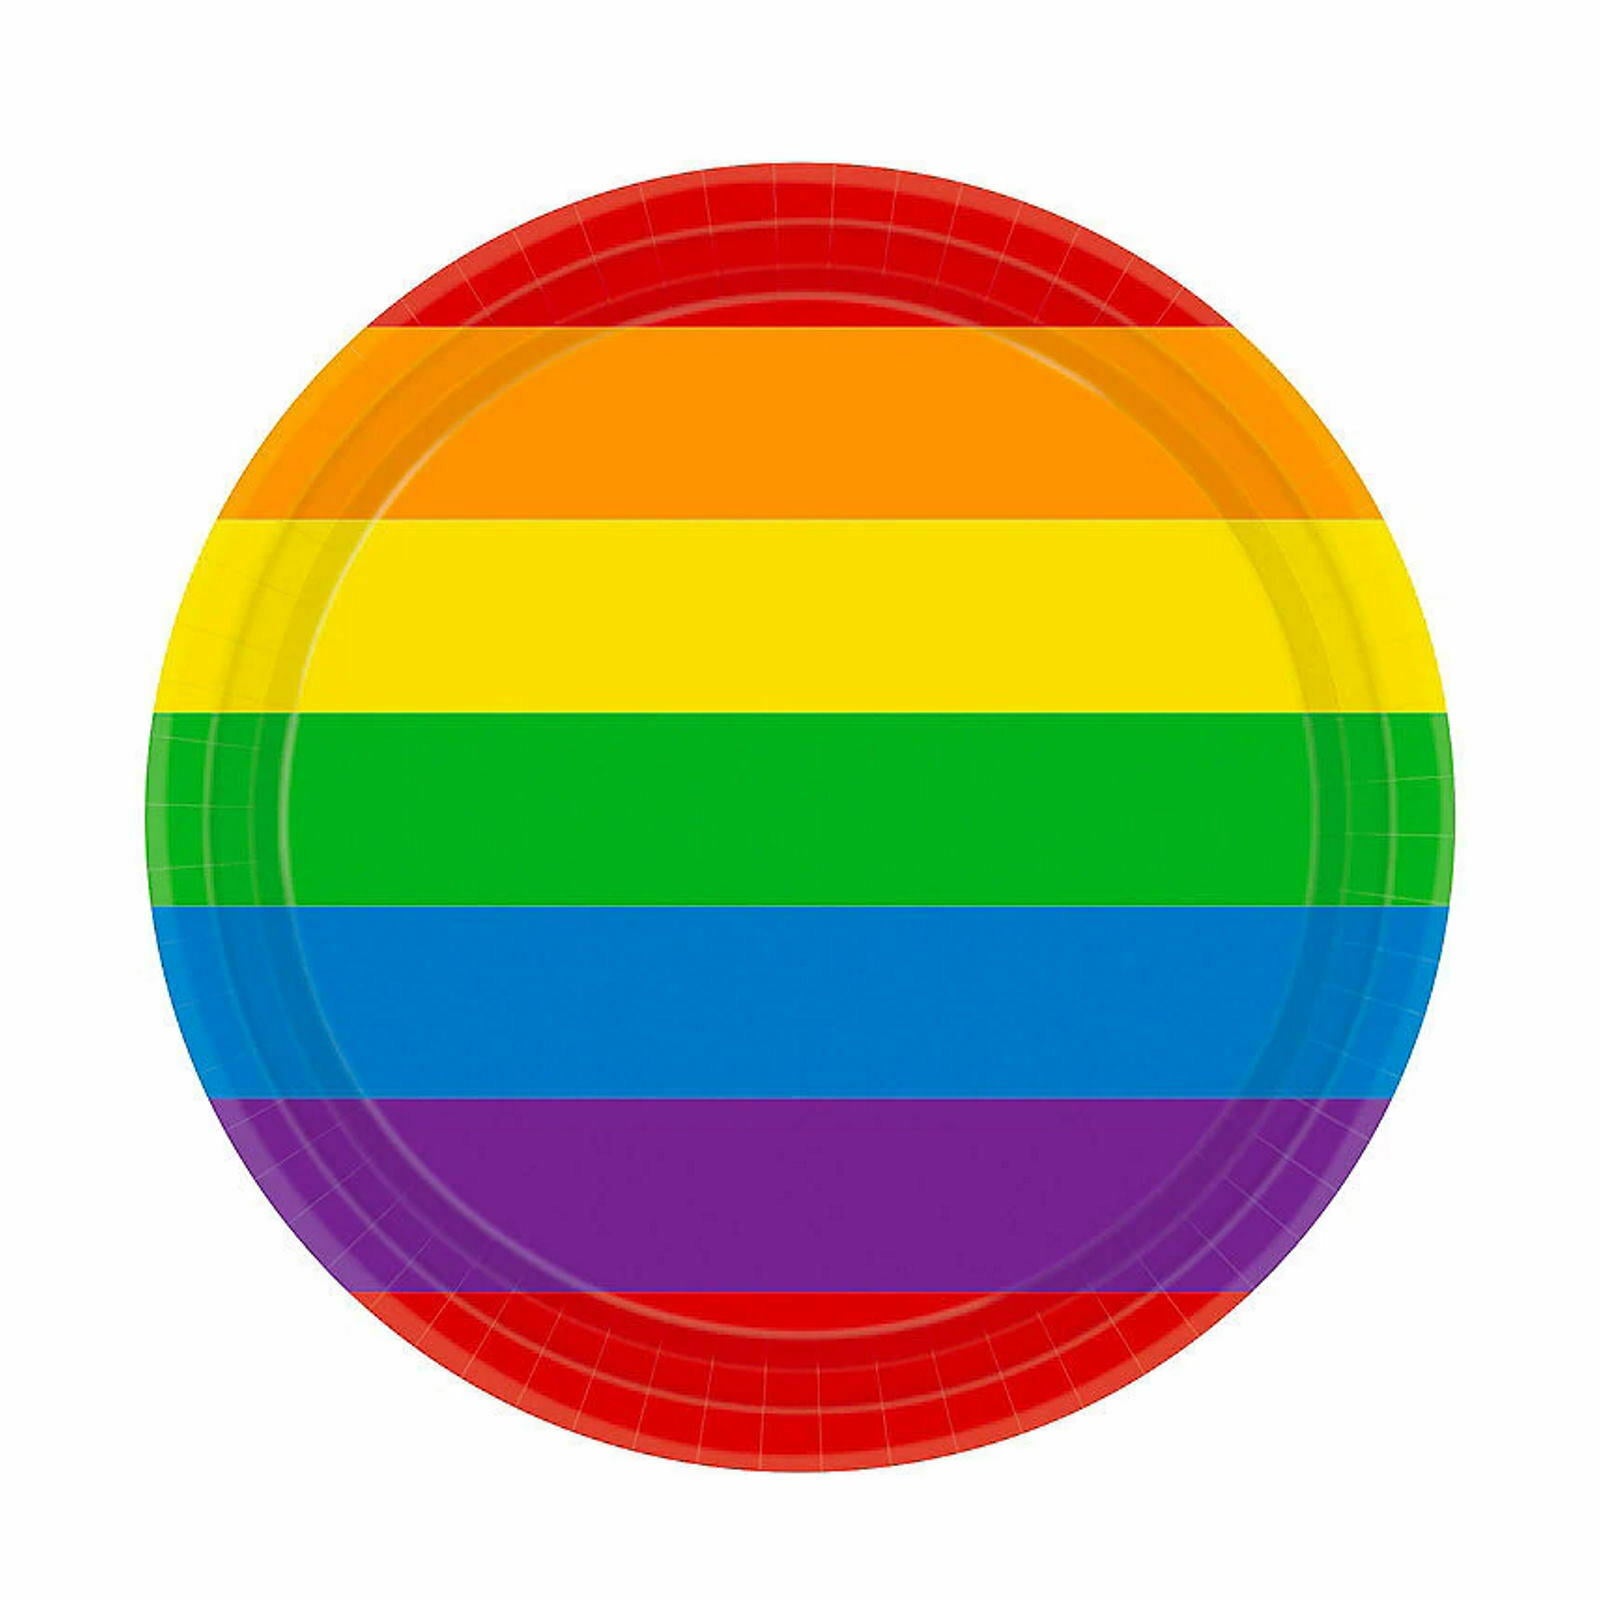 Paper Plate - Rainbow Round Paper Lunch Plates 7"/ 17cm